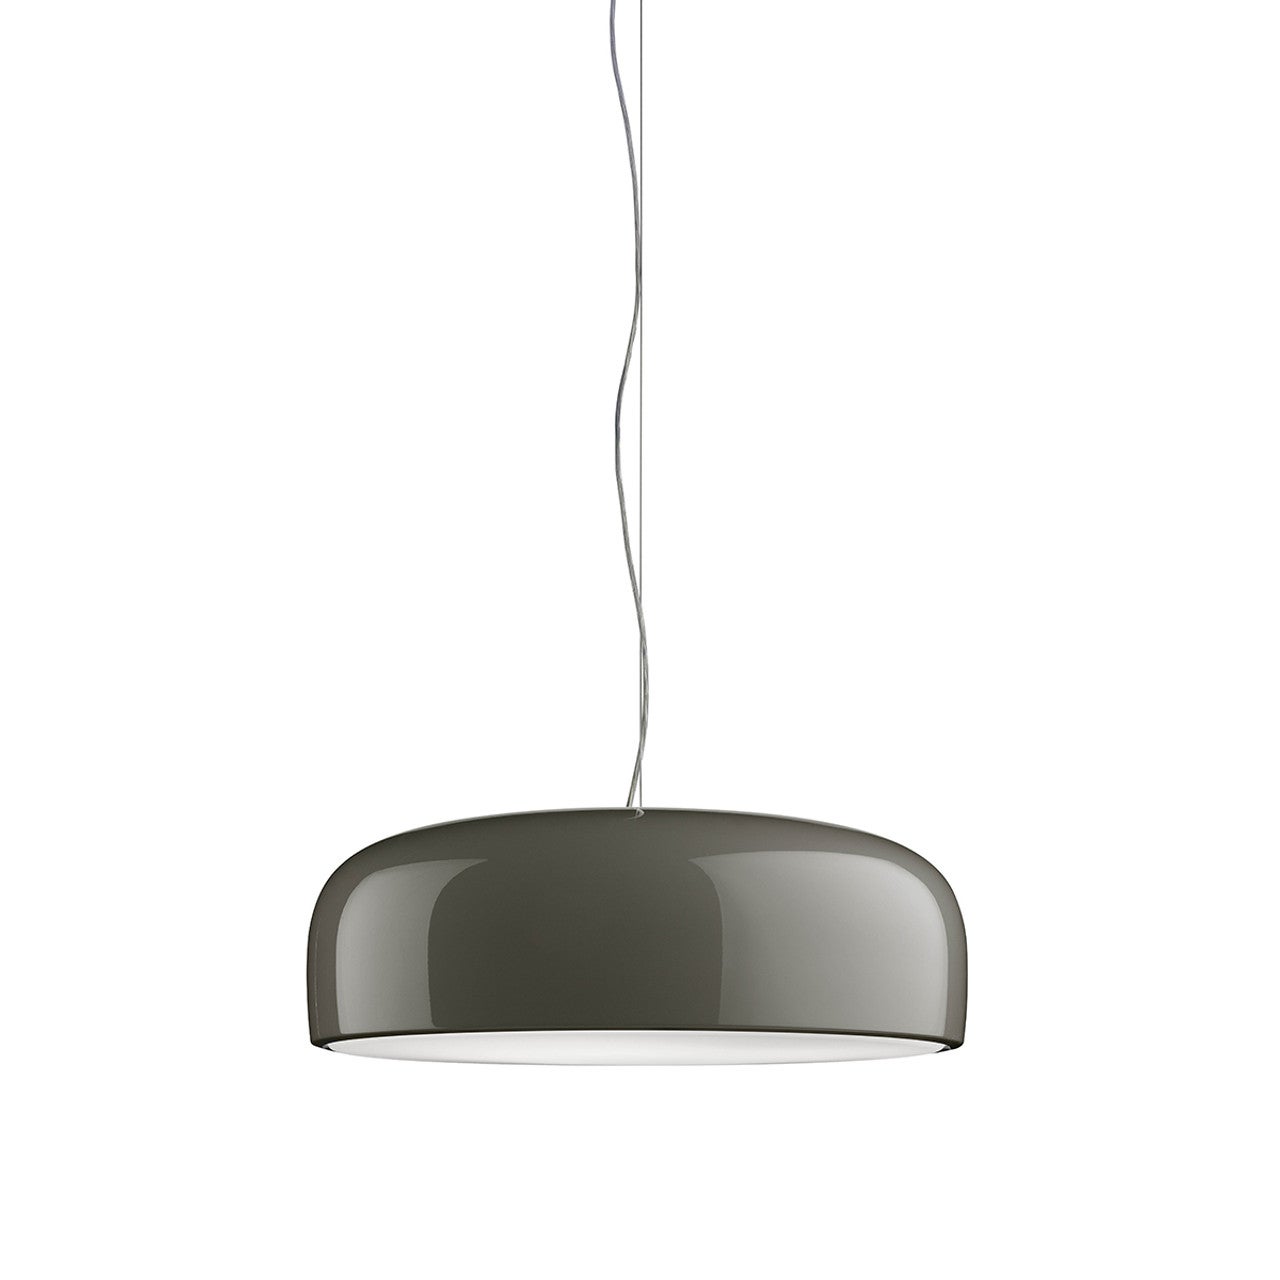 Flos Smithfield E26 Suspension Dimmable Pendant Light in Mud For Sale